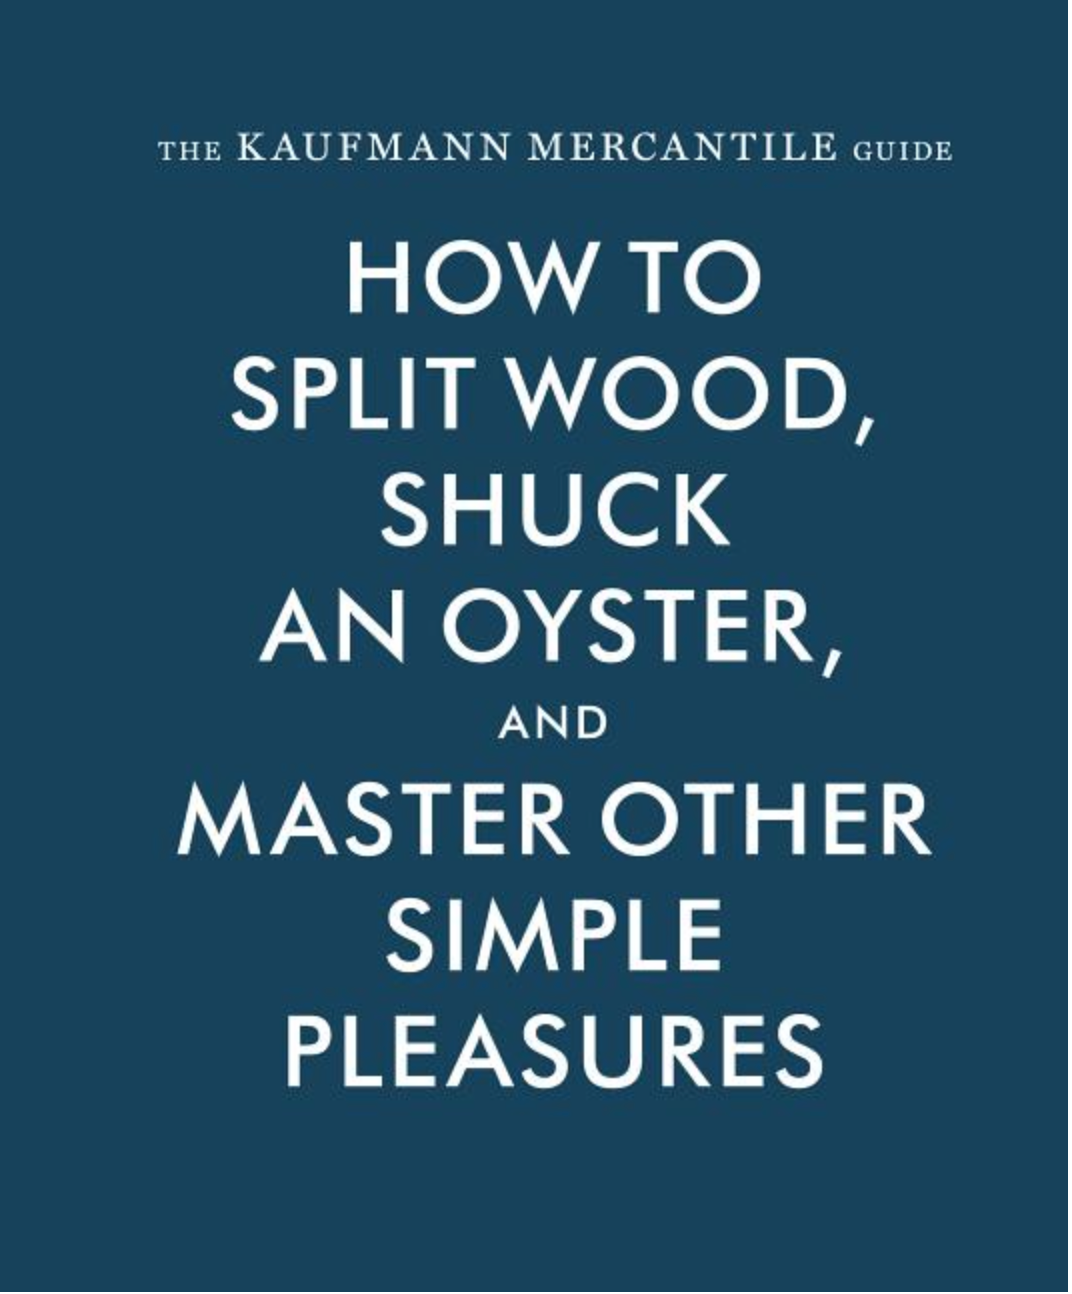 How To Split Wood, Shuck An Oyster, and Master Other Simple Pleasures